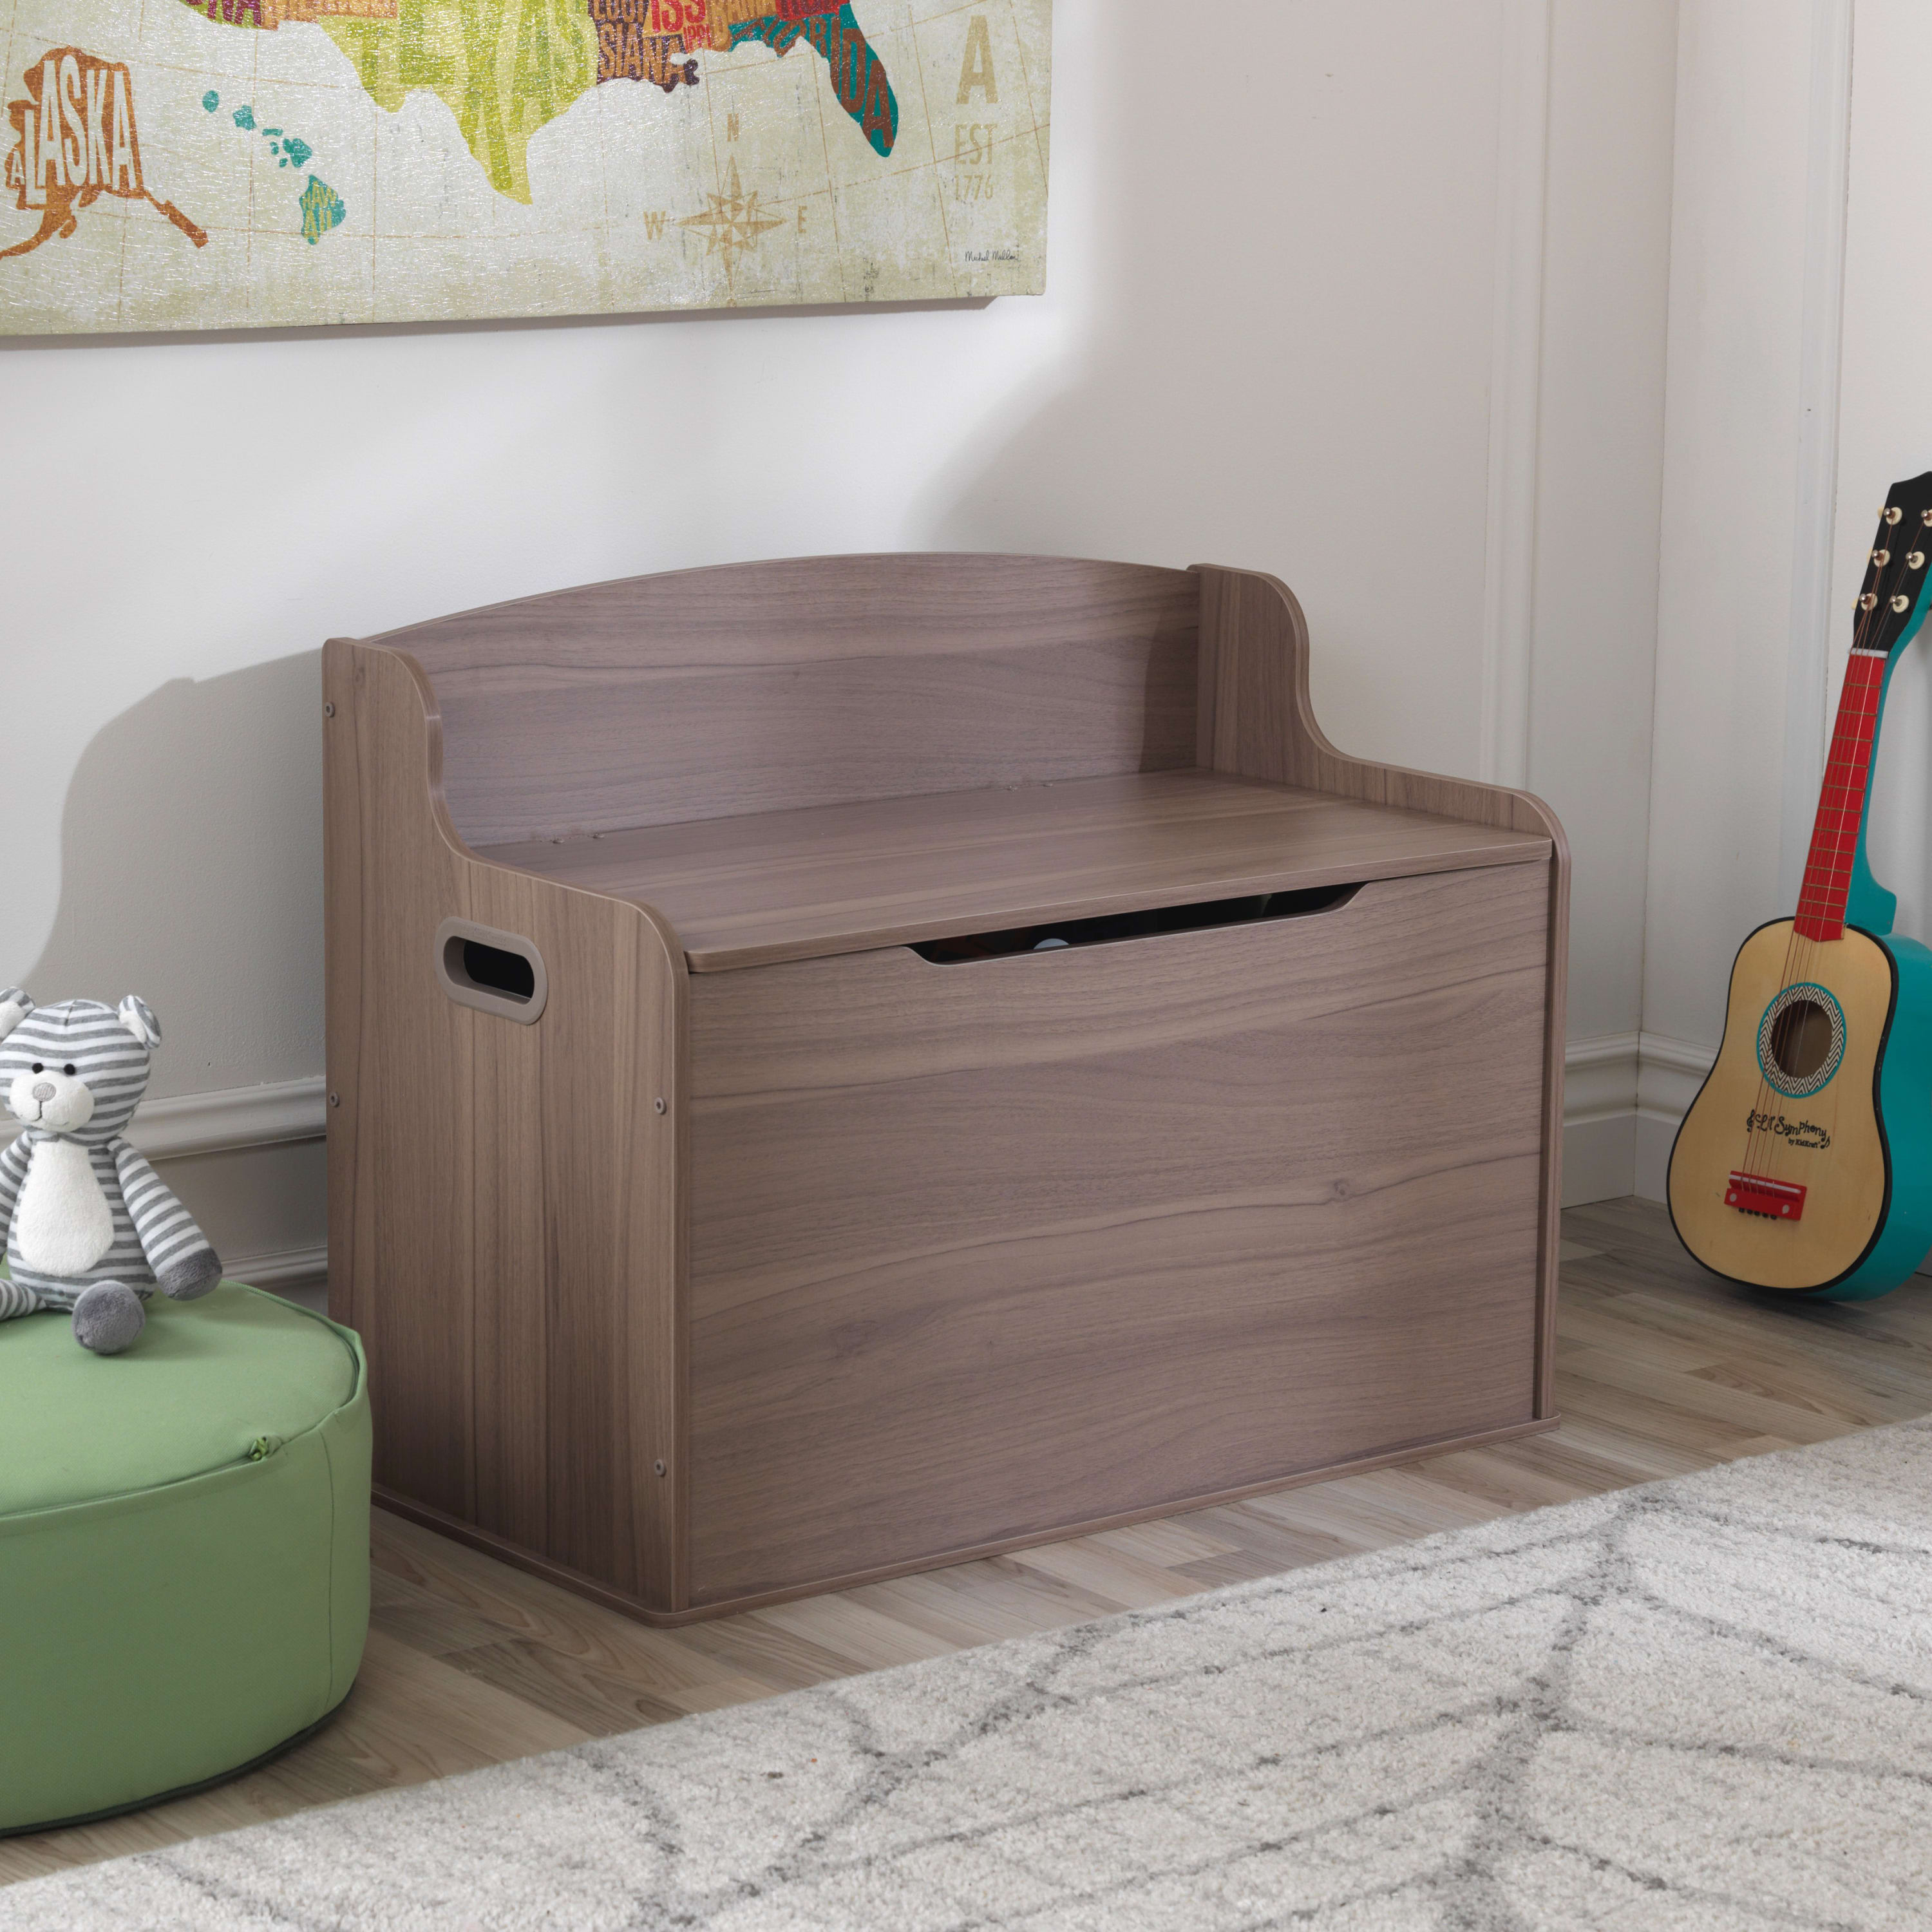 KidKraft Wooden Fill with Fun Toy Box with Safety Hinges, Gray Ash - image 4 of 8